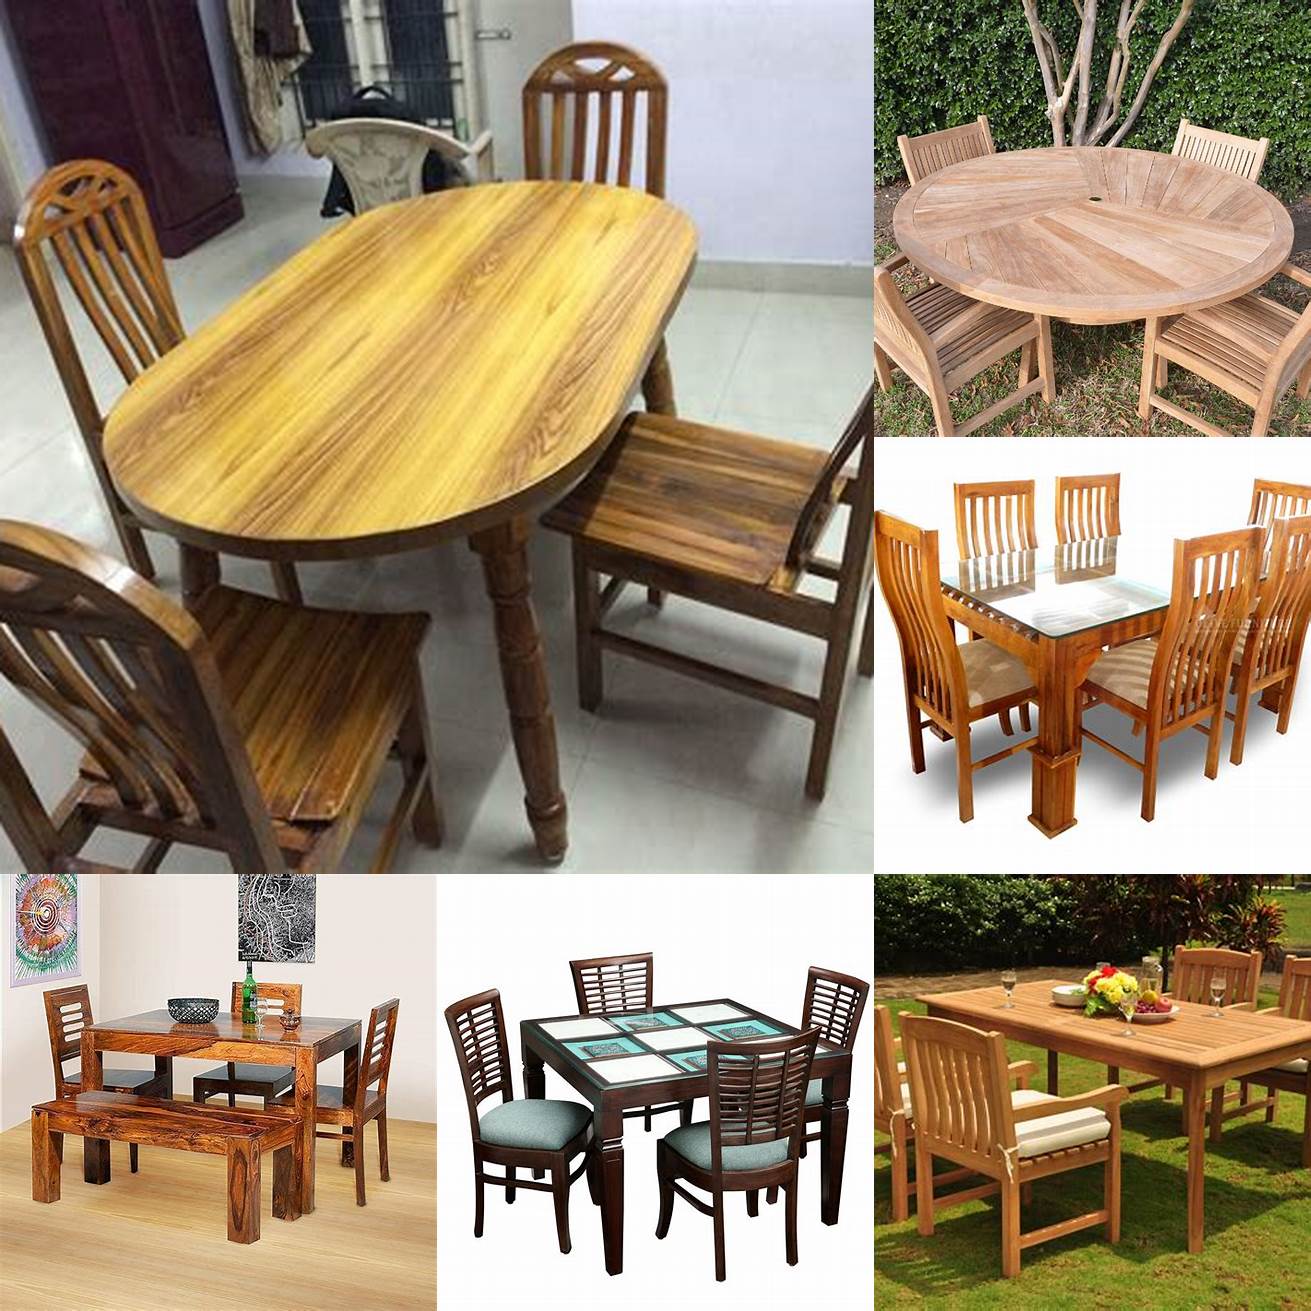 Teak Wood Dining Table in Different Colors